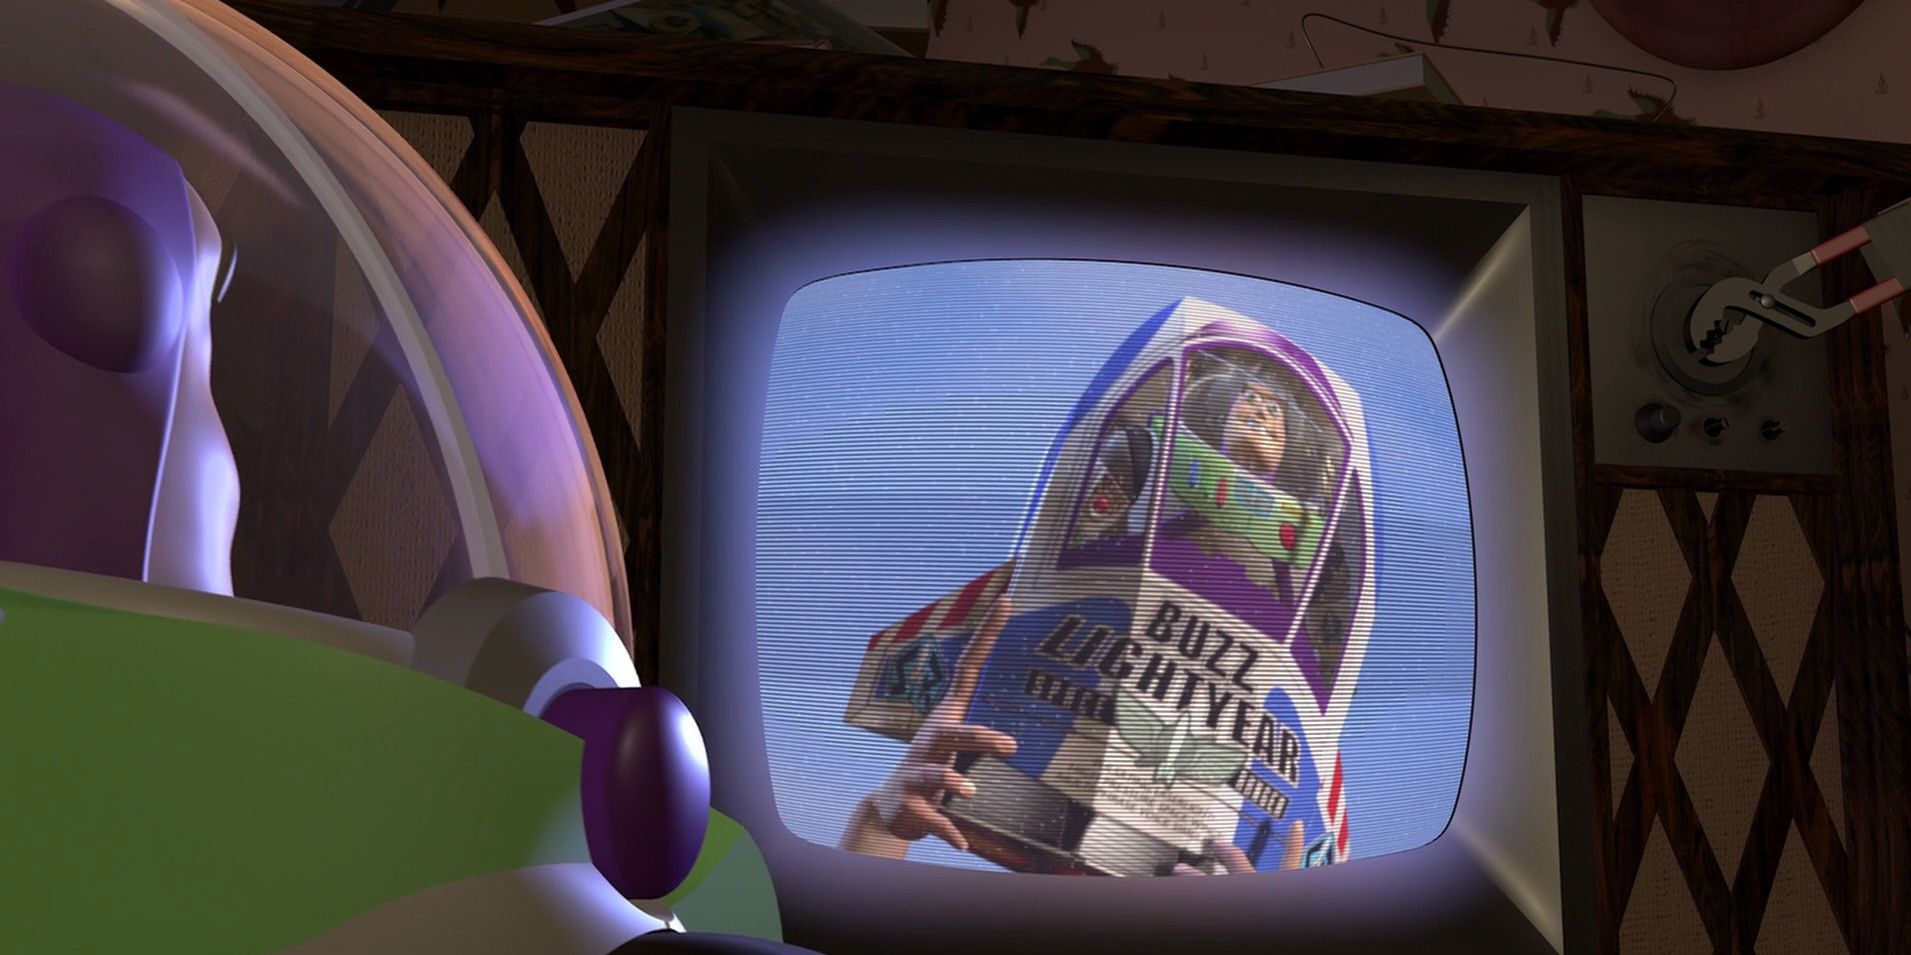 Buzz Lightyear watches the Buzz Lightyear toy commercial in Toy Story.